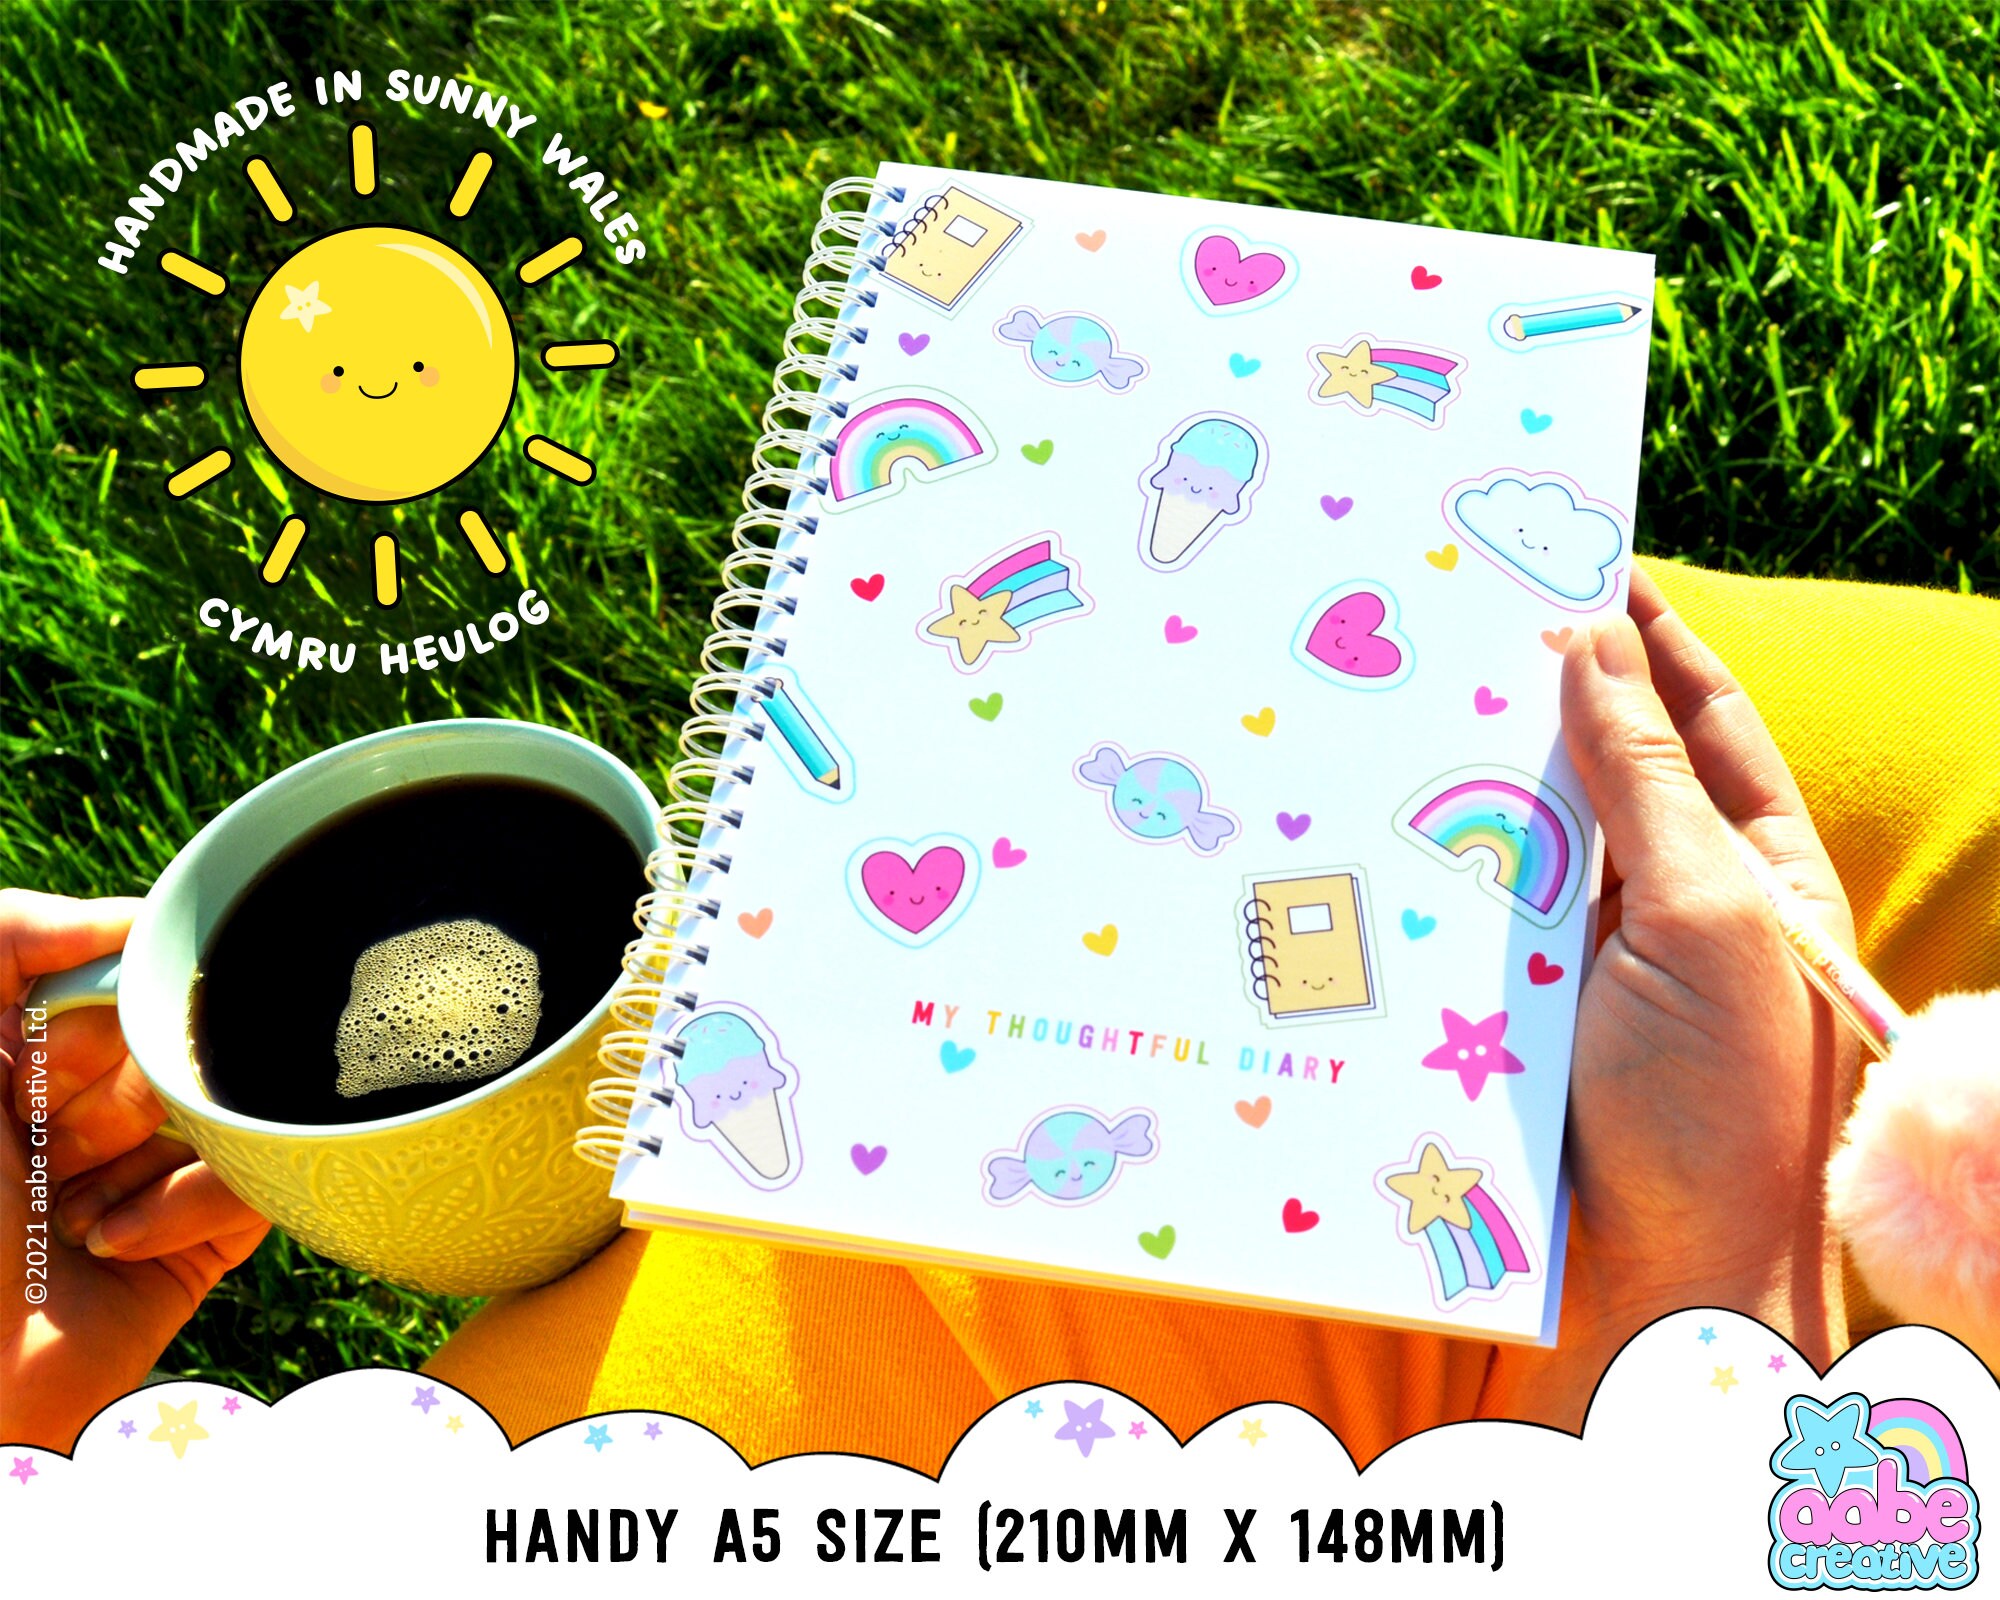 Colourful Bee Happy Kids Planner A5 Undated Girl Mood Boy Handmade Diary for children of all ages 126 days Day-to-view My Booky Journal